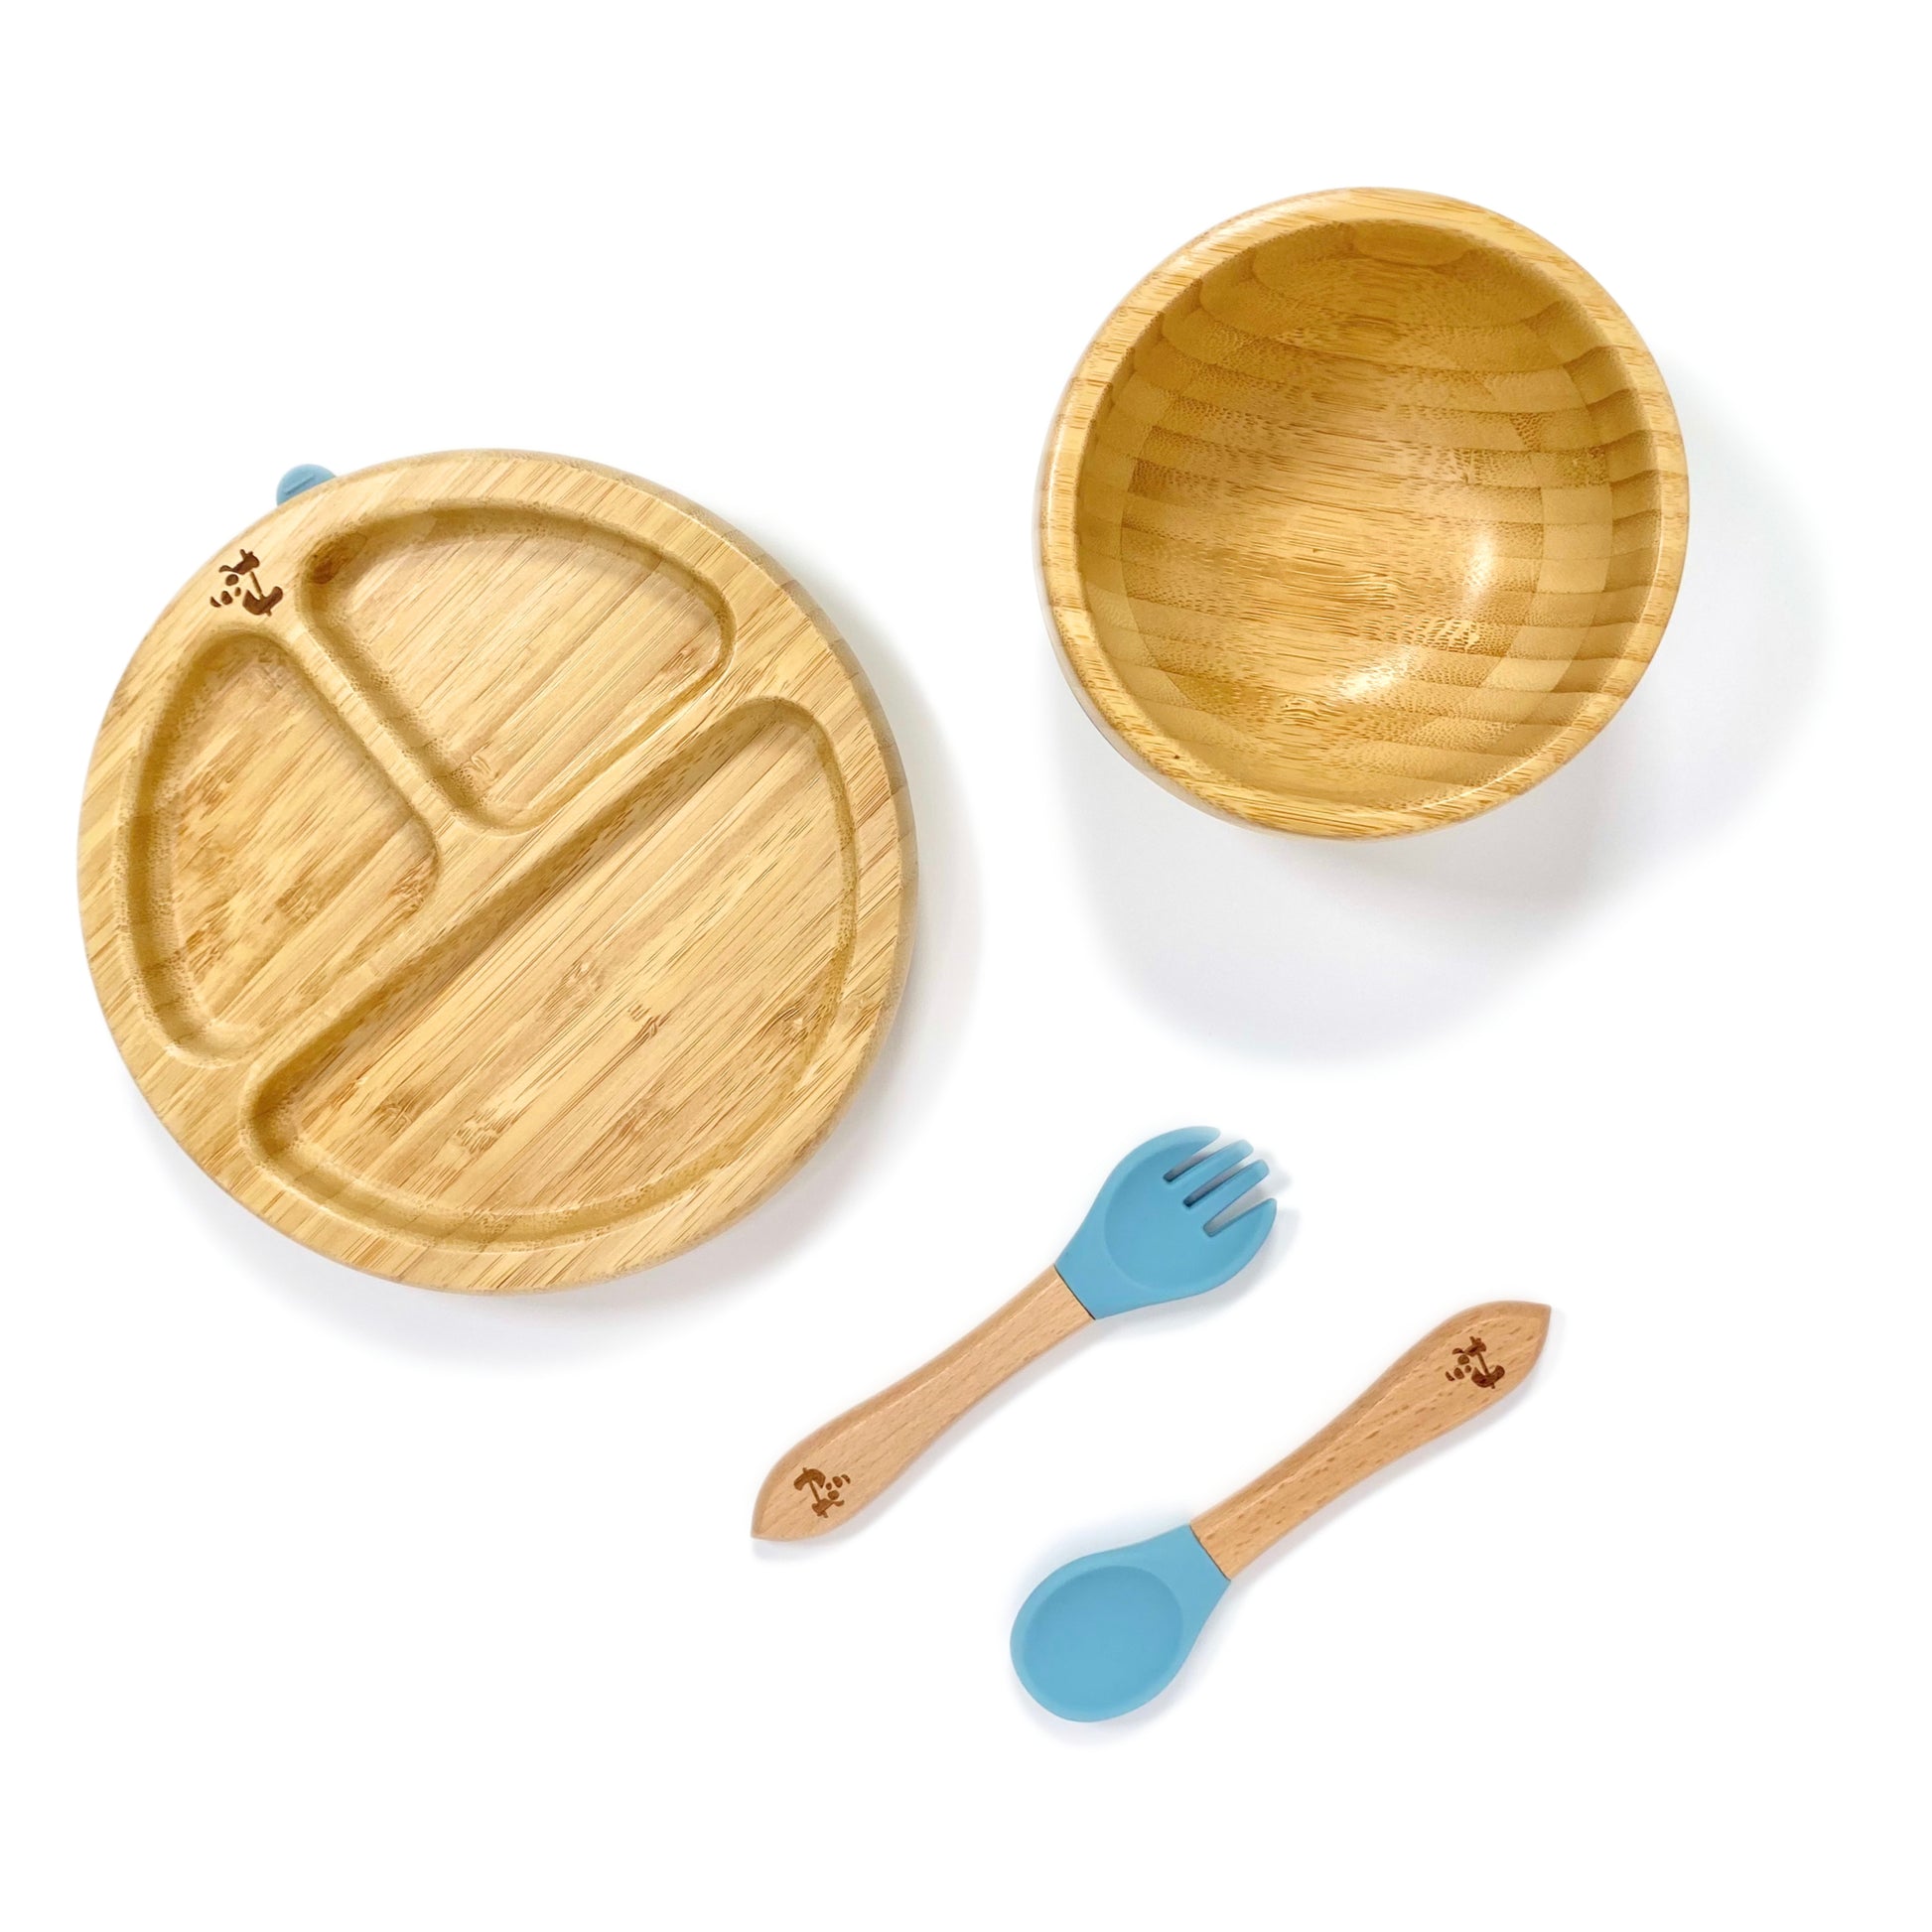 A children’s bamboo tableware set, including bamboo section plate with sky blue silicone suction ring, bamboo bowl with sky blue silicone suction ring and matching bamboo and silicone cutlery.